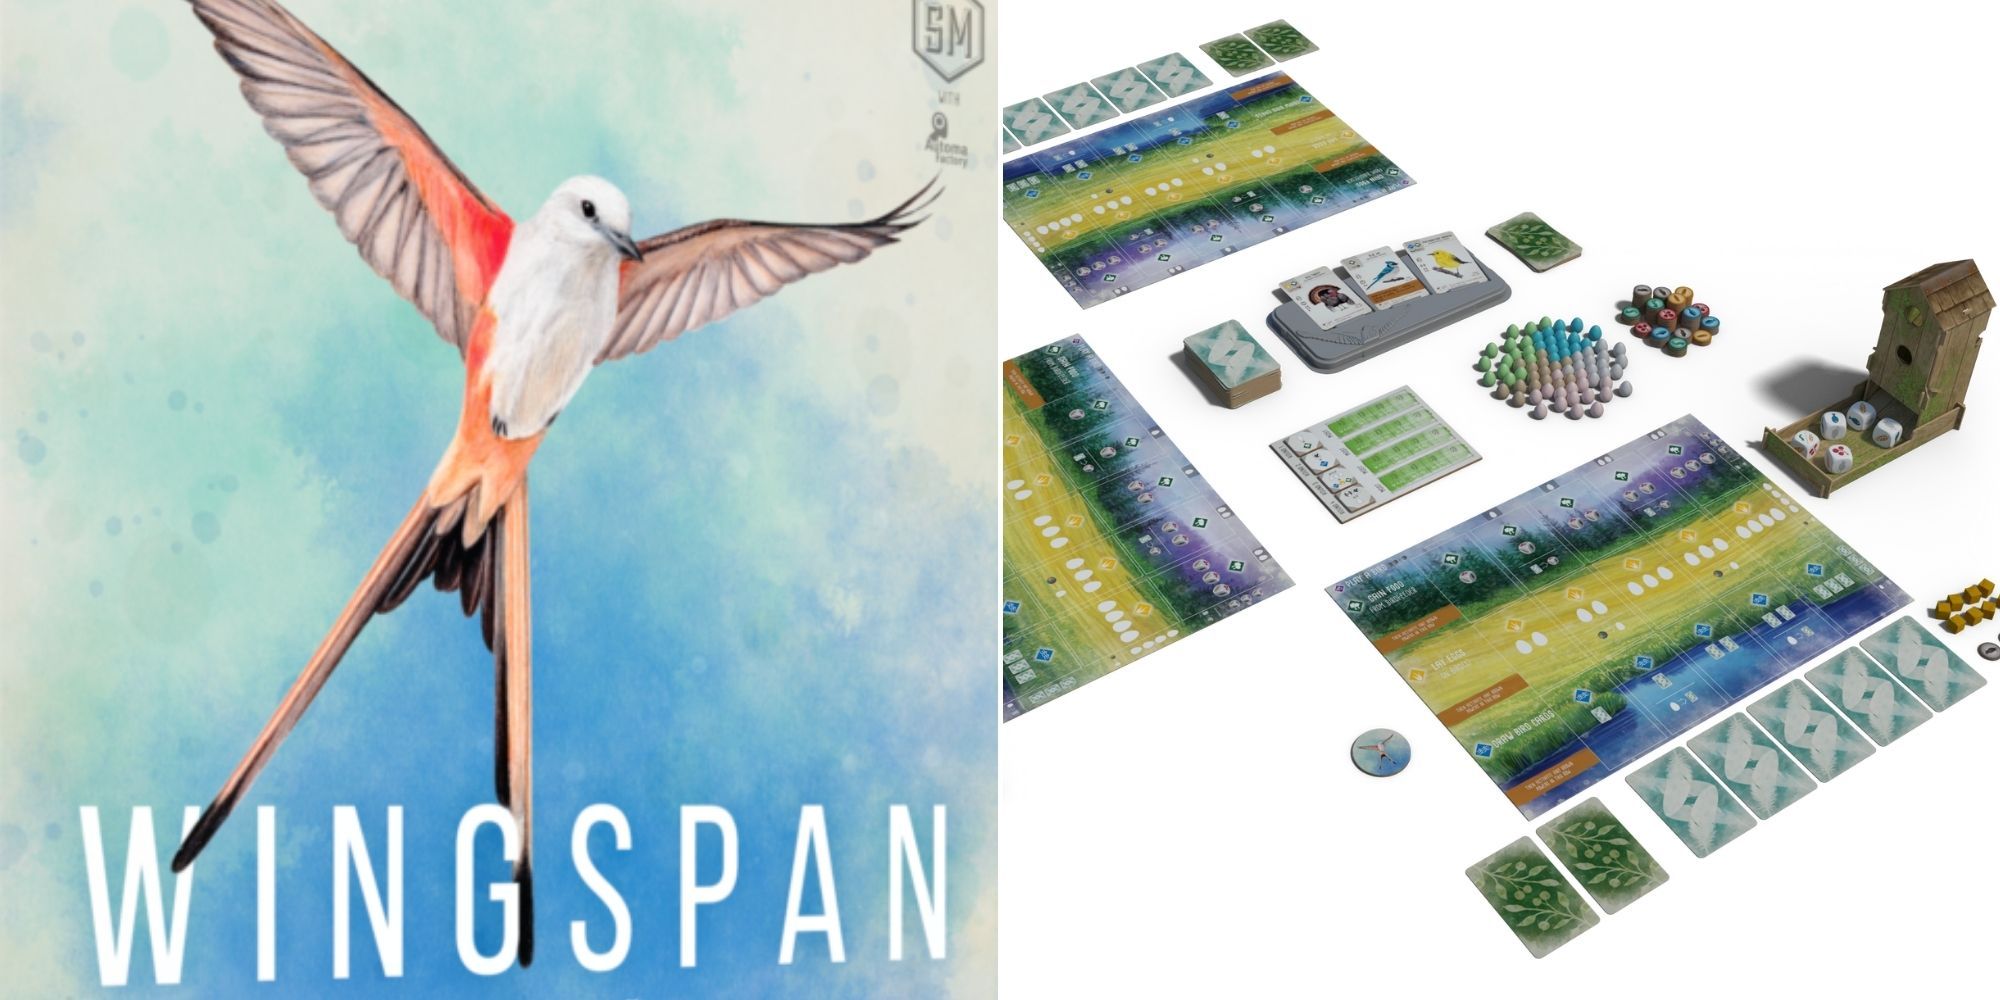 Wingspan - Board Game Box - Game boards and components